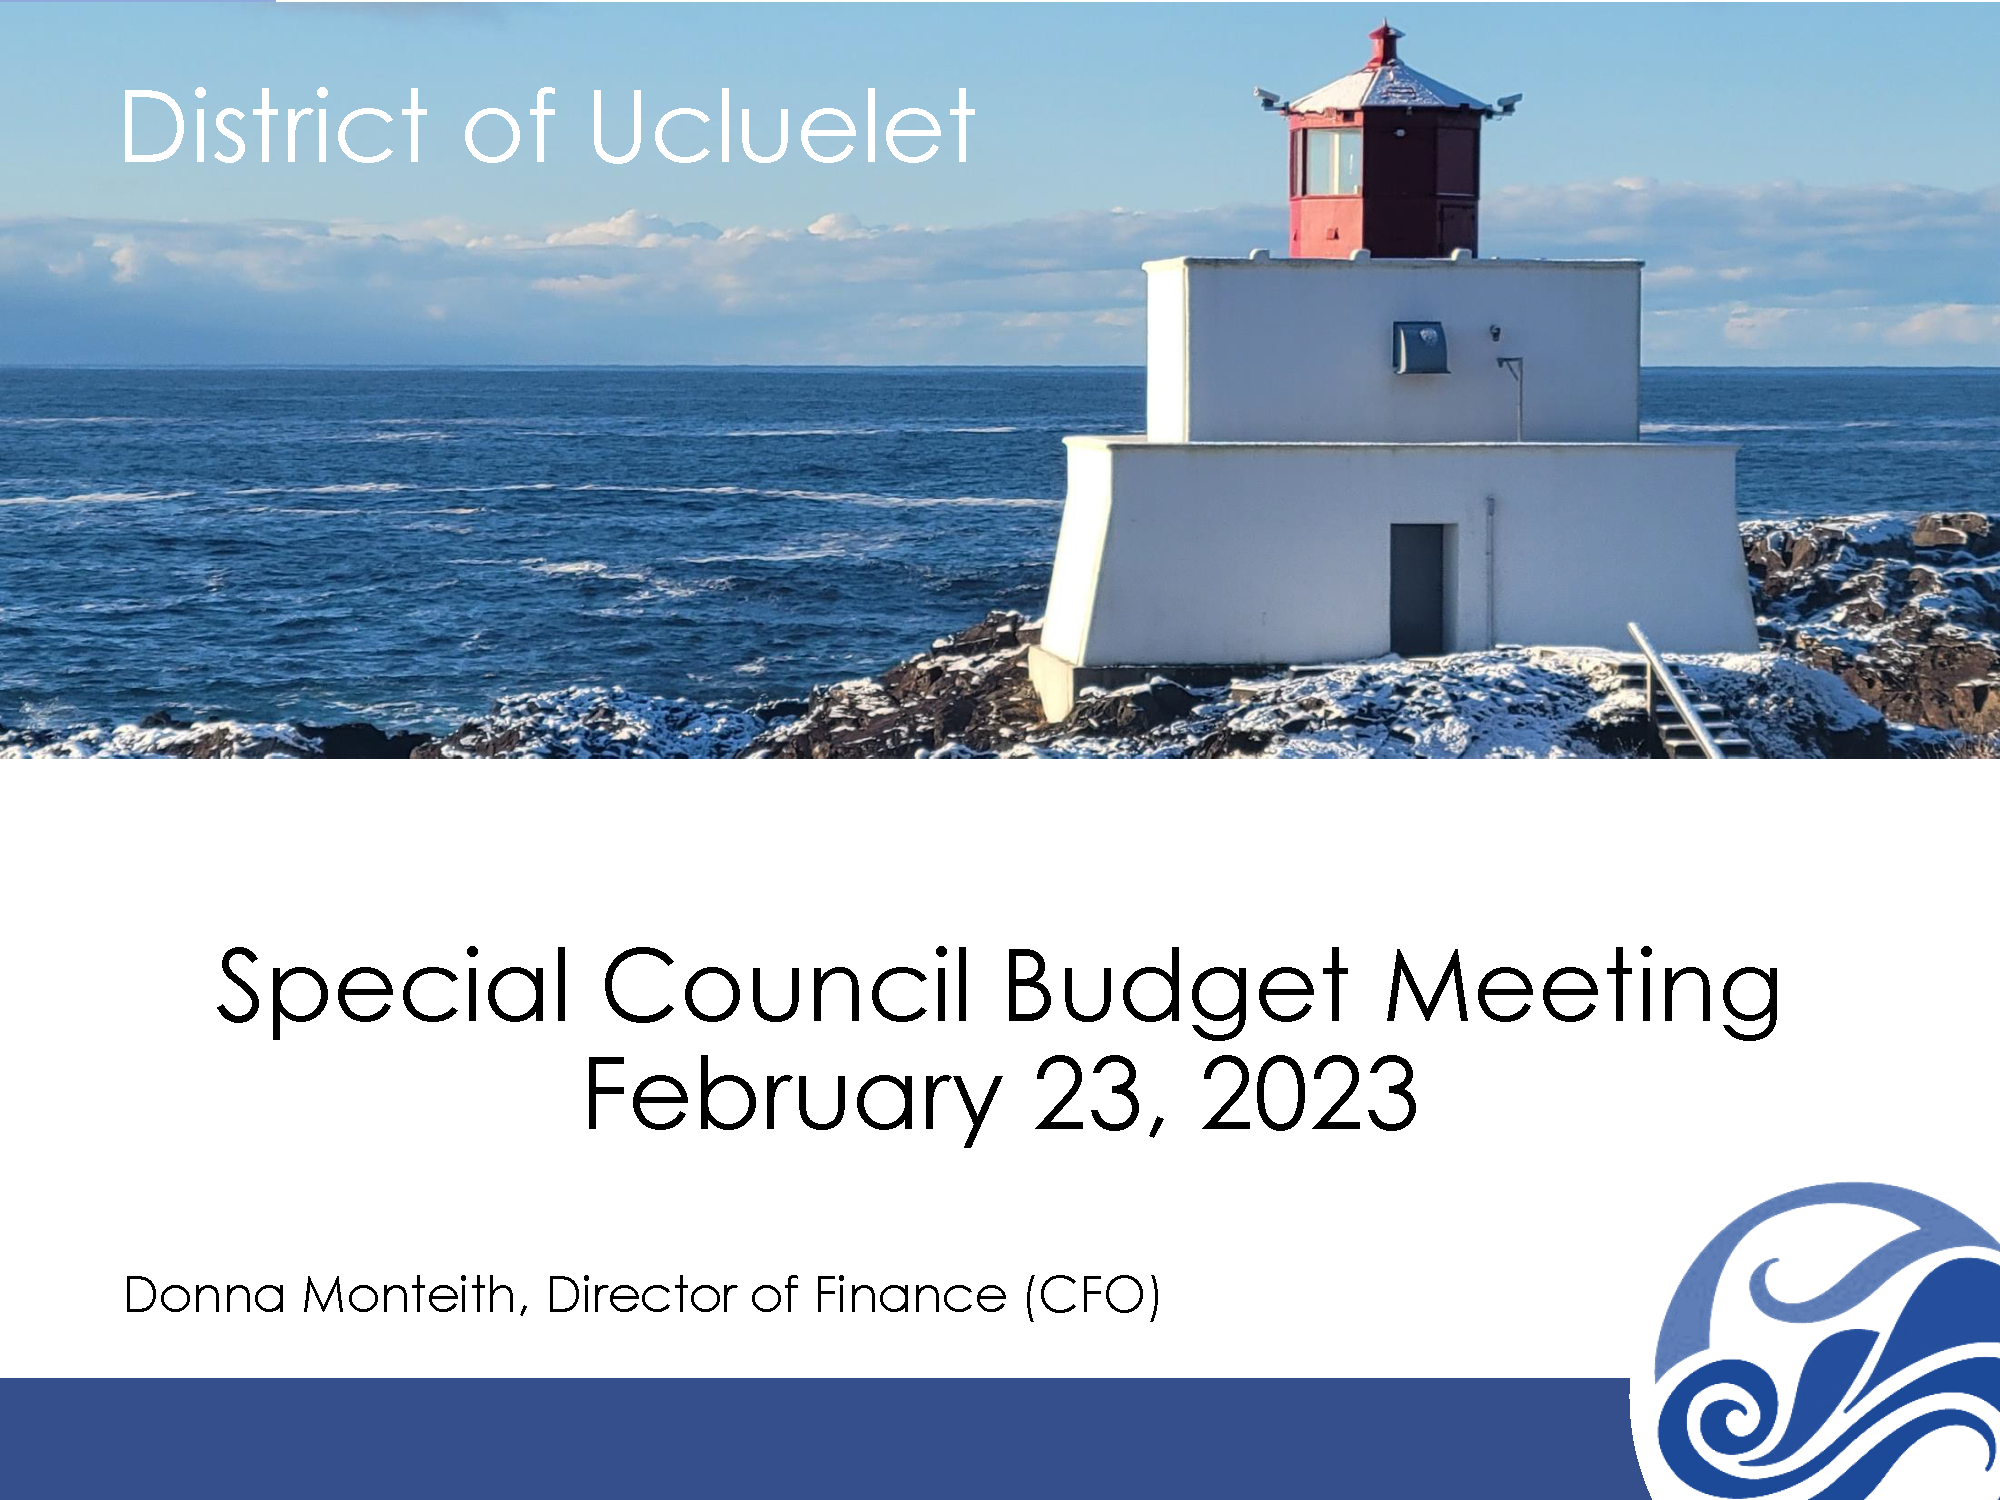 Budget Meeting Slides Feb 23 2023 for website Page 01